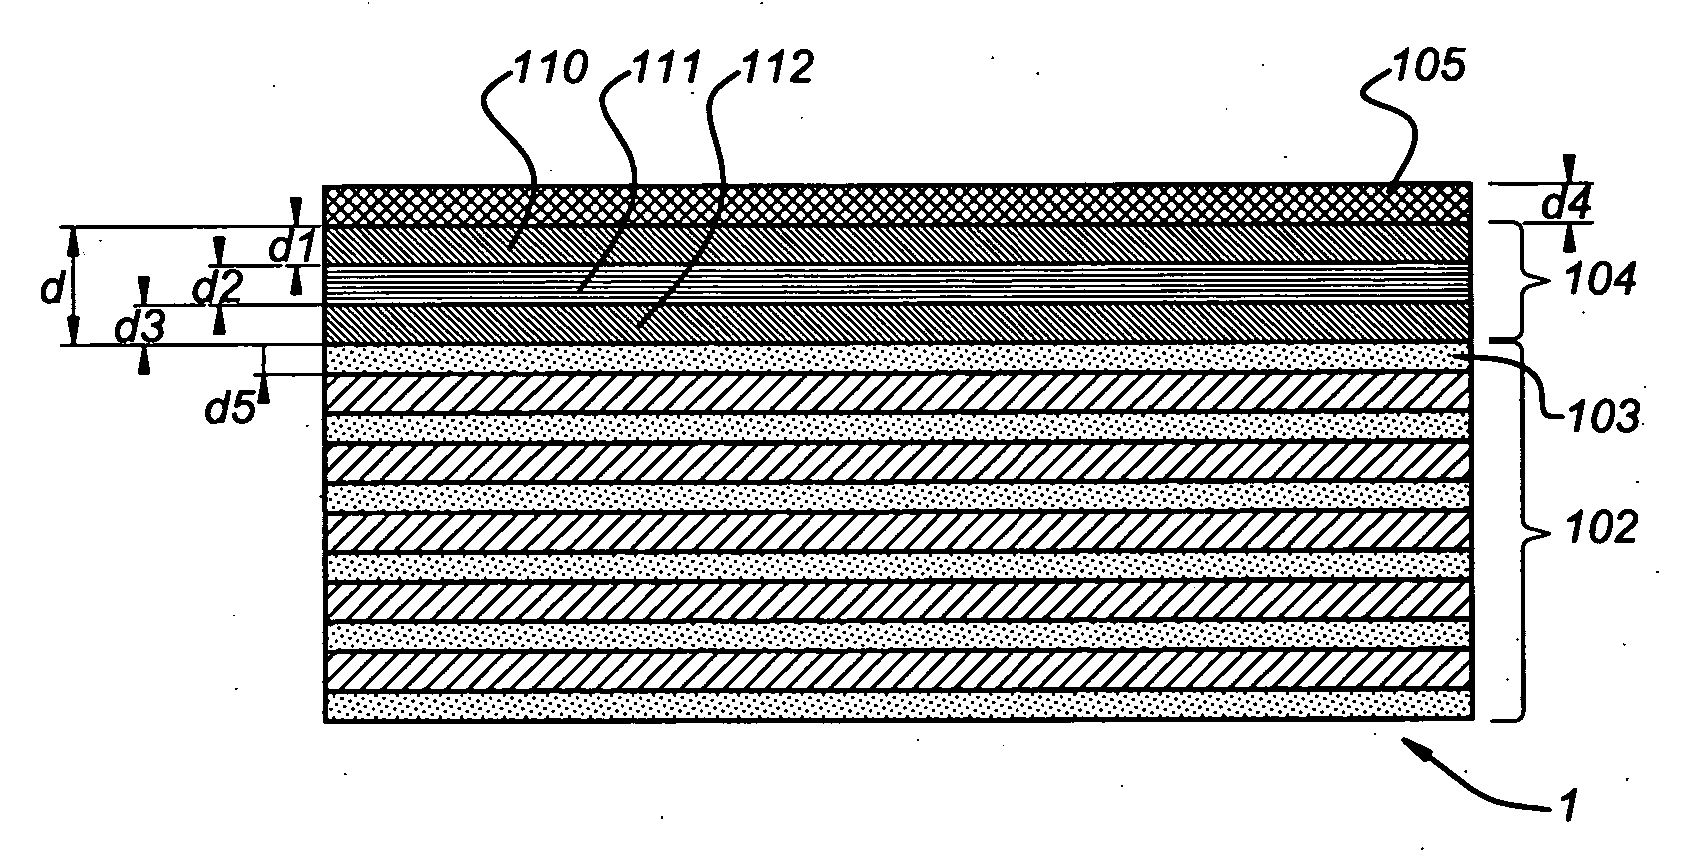 Spectral purity filter for a multi-layer mirror, lithographic apparatus including such multi-layer mirror, method for enlarging the ratio of desired radiation and undesired radiation, and device manufacturing method